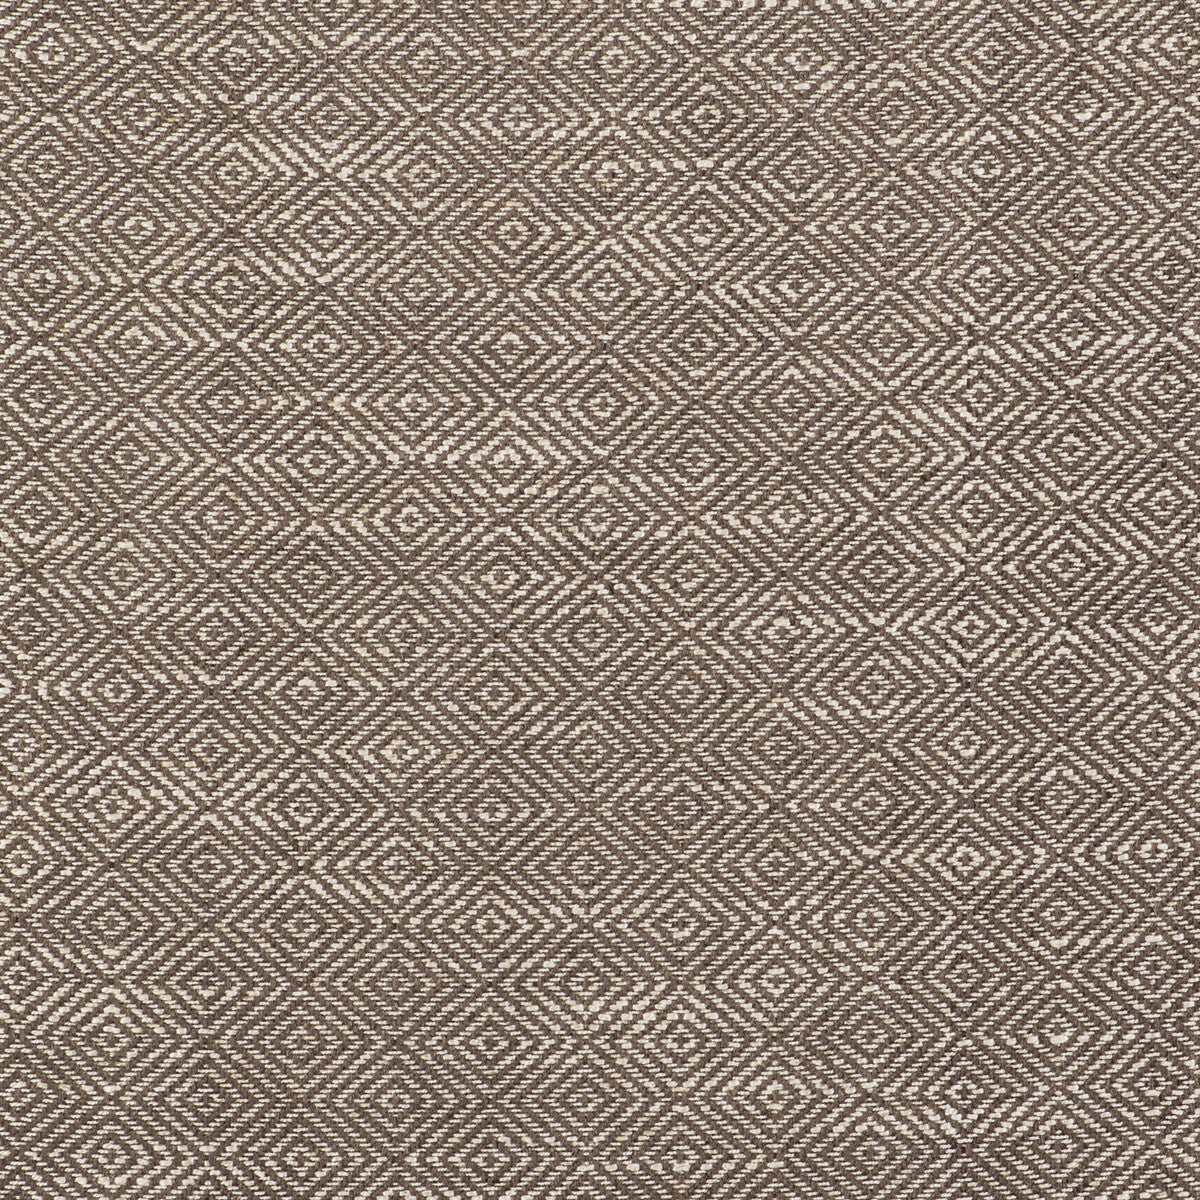 Acre fabric in tostado color - pattern GDT5520.002.0 - by Gaston y Daniela in the Gaston Libreria collection